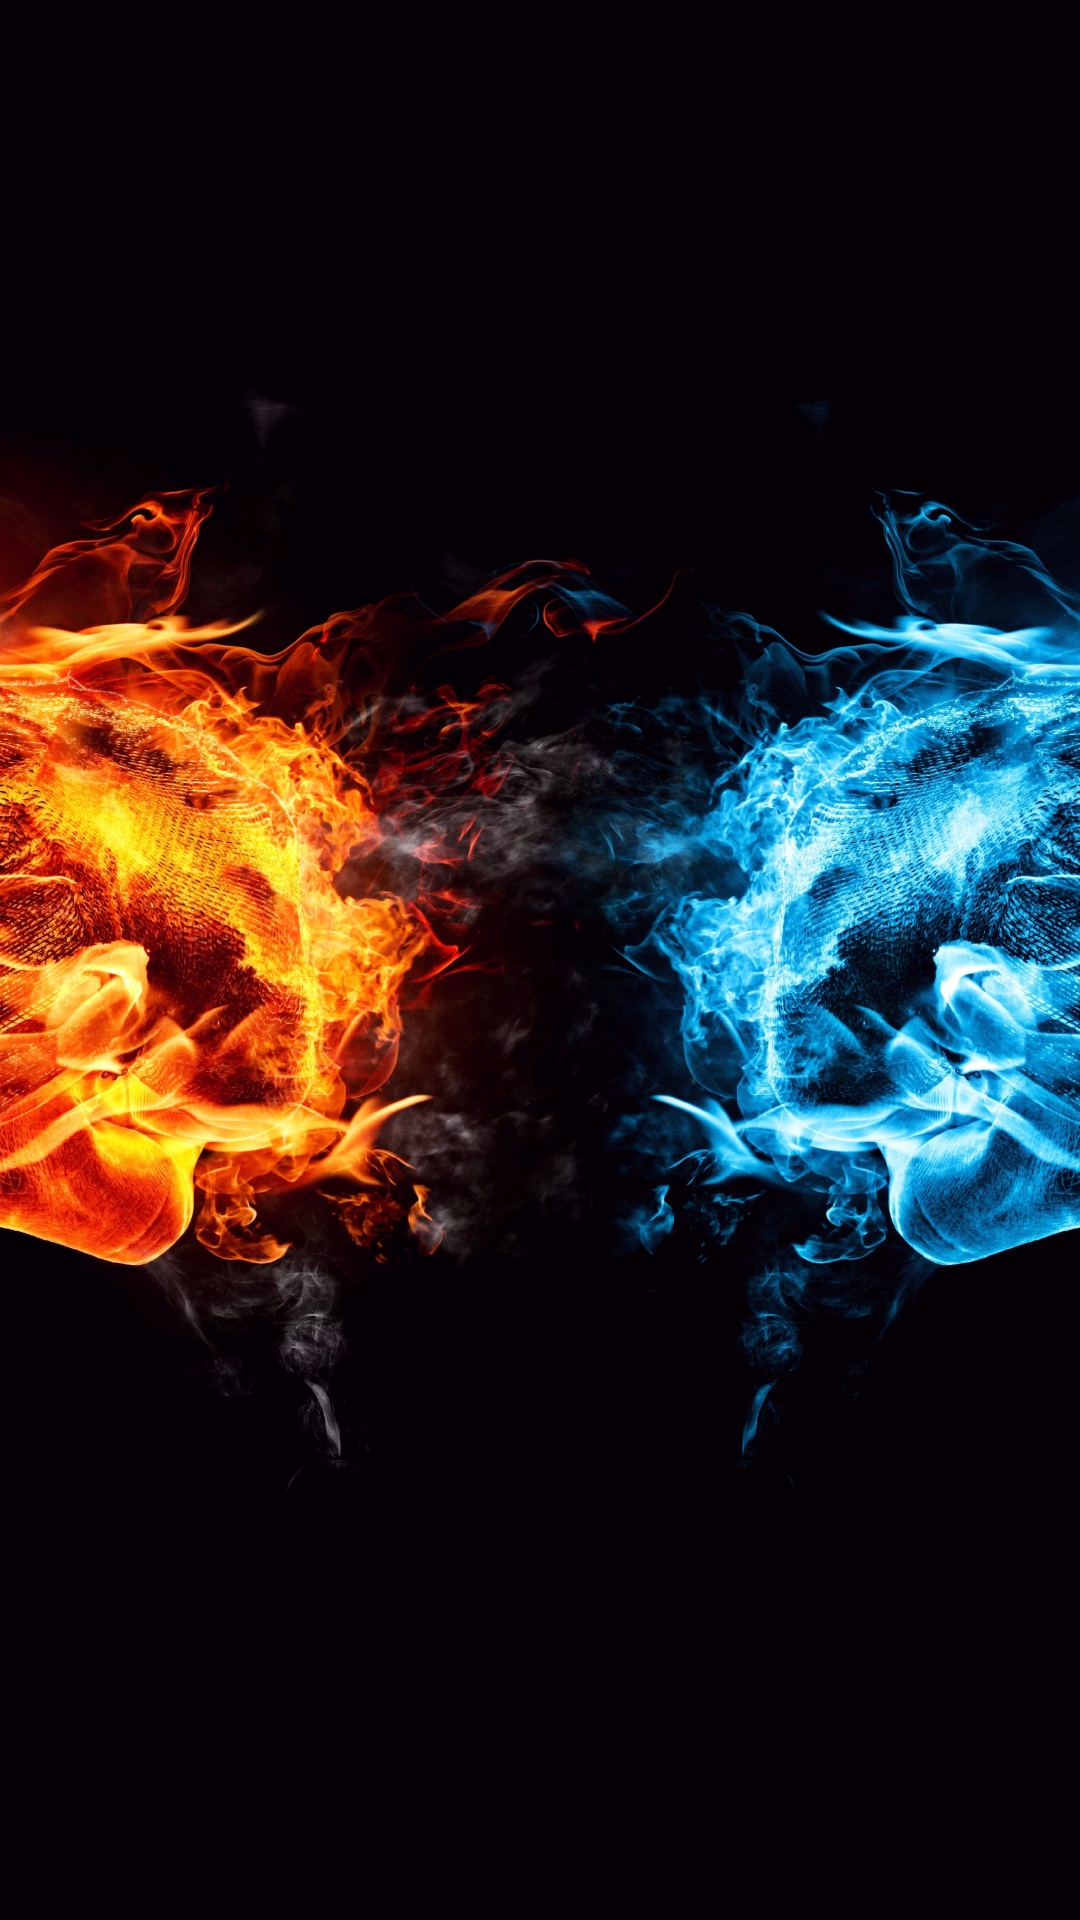 Blue and Orange Flame Illustration. Wallpaper in 1080x1920 Resolution